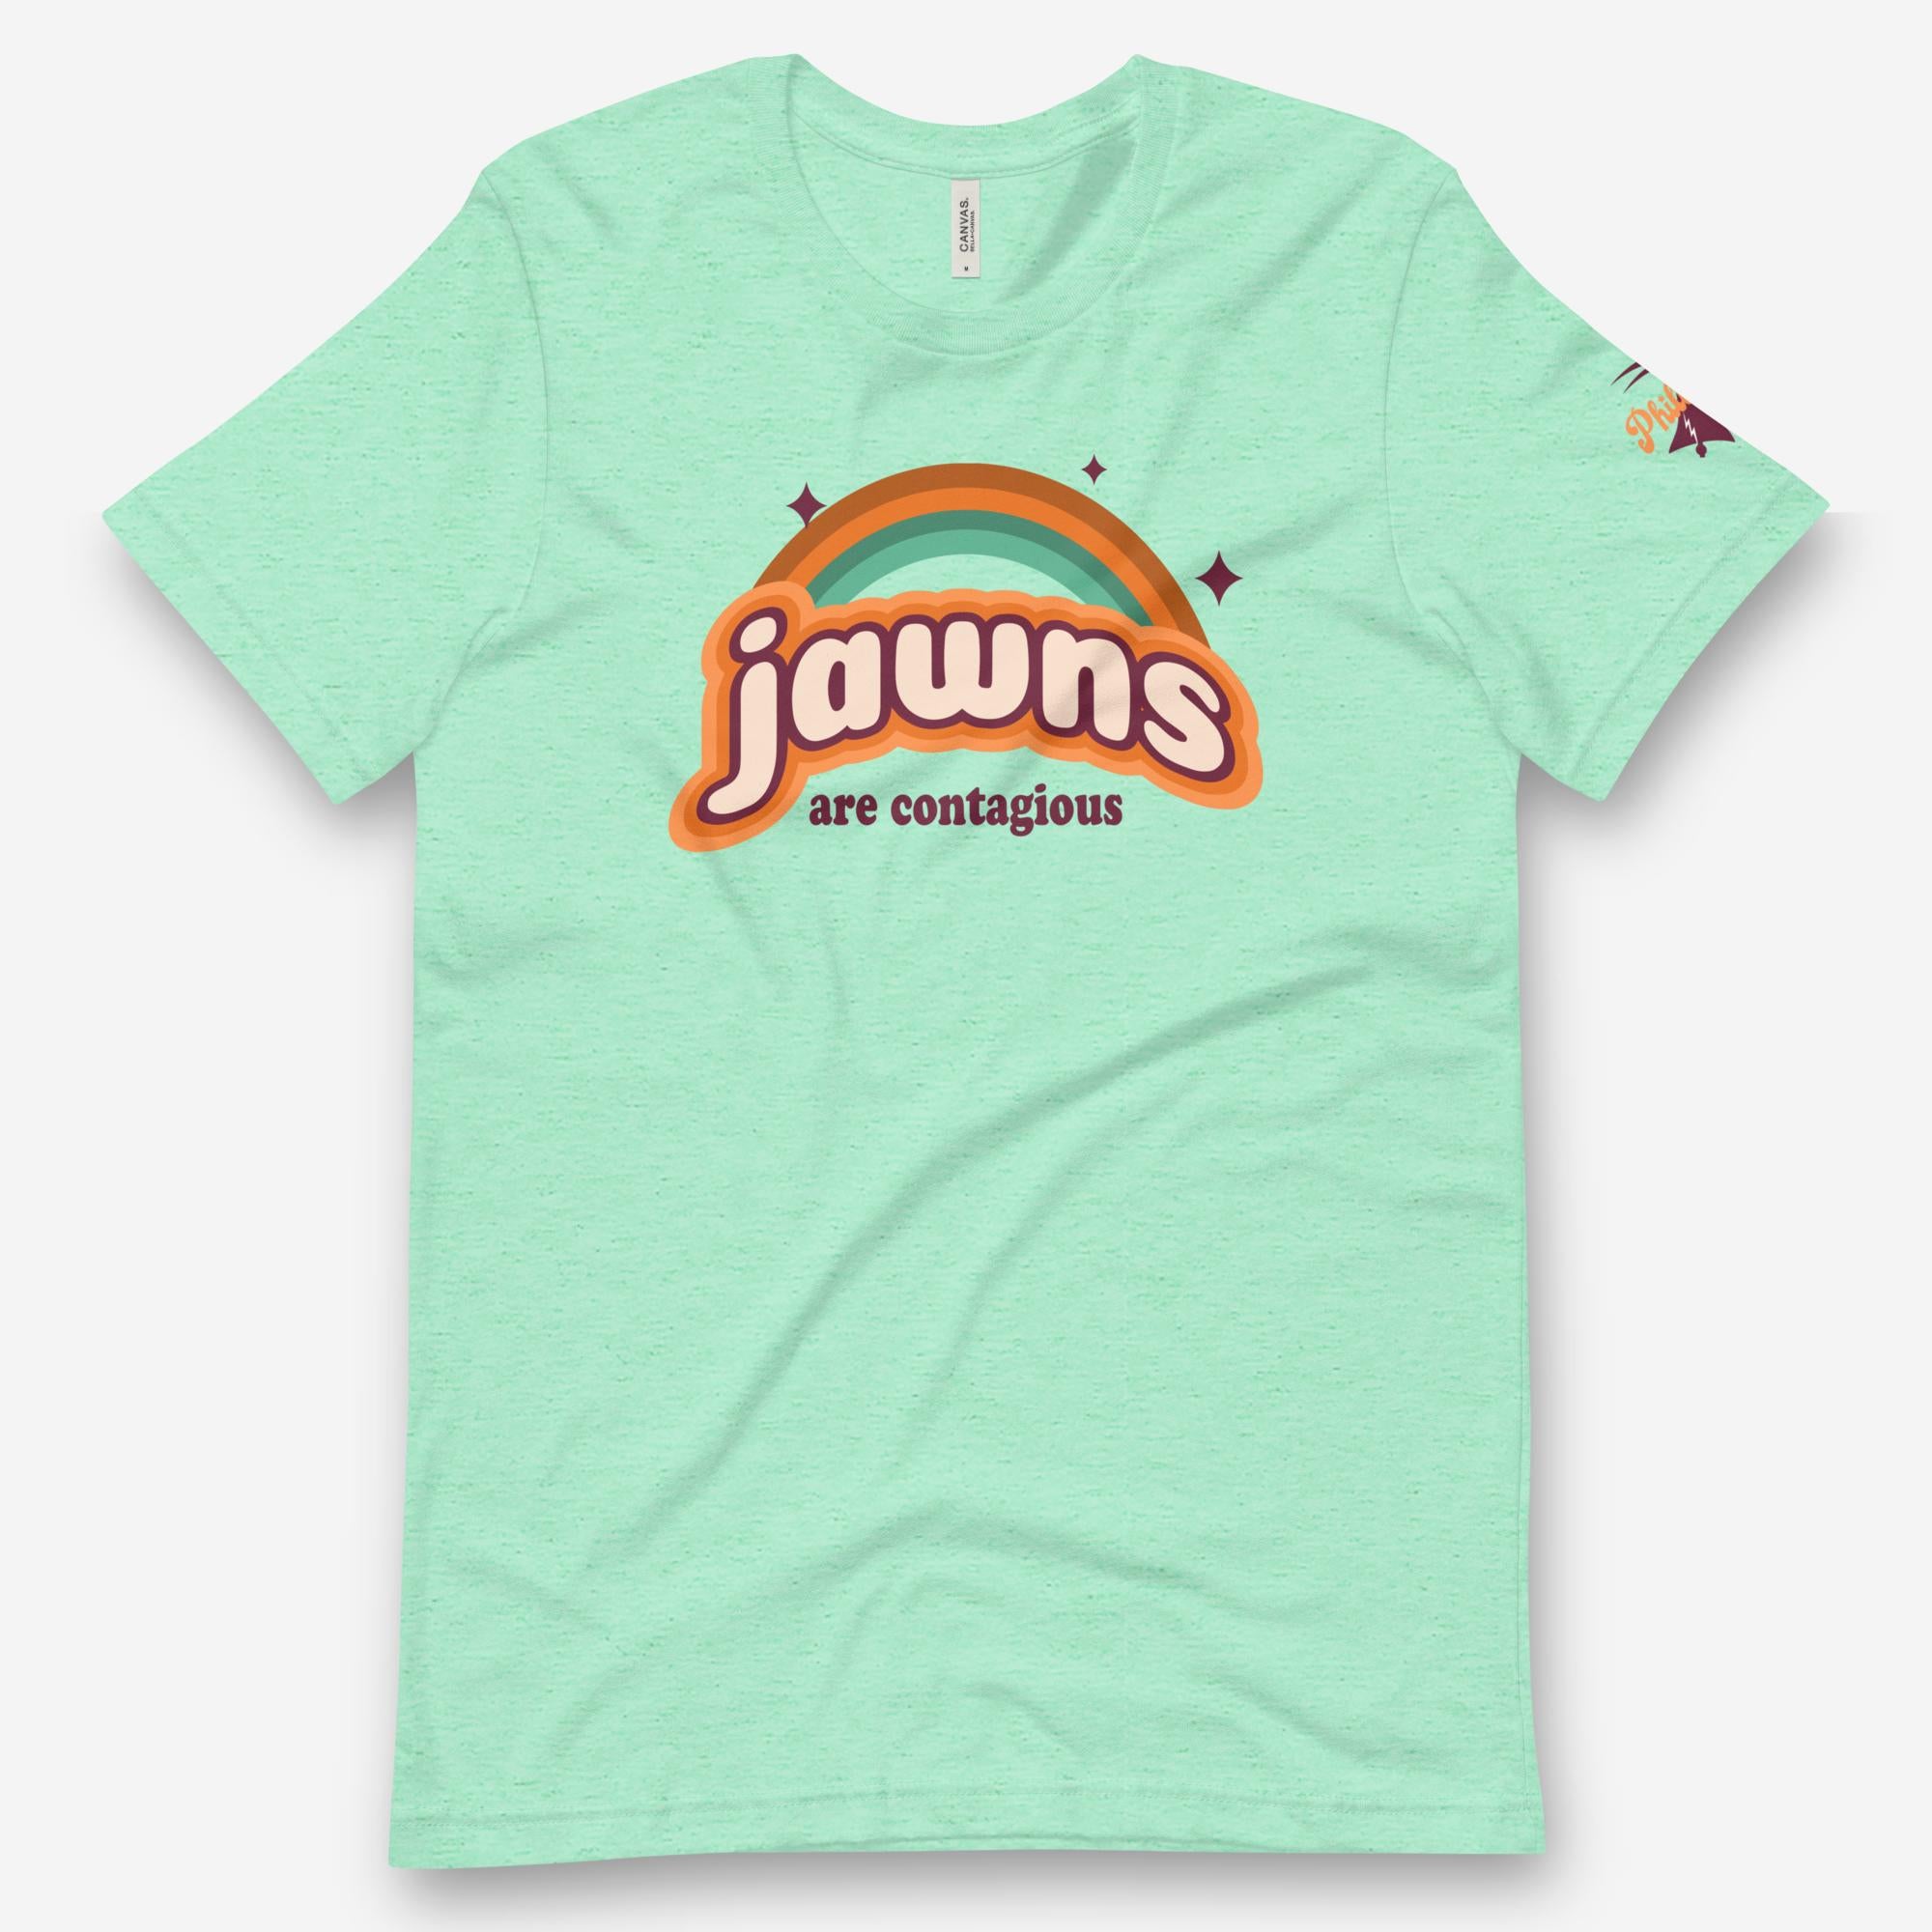 "Jawns Are Contagious" Tee